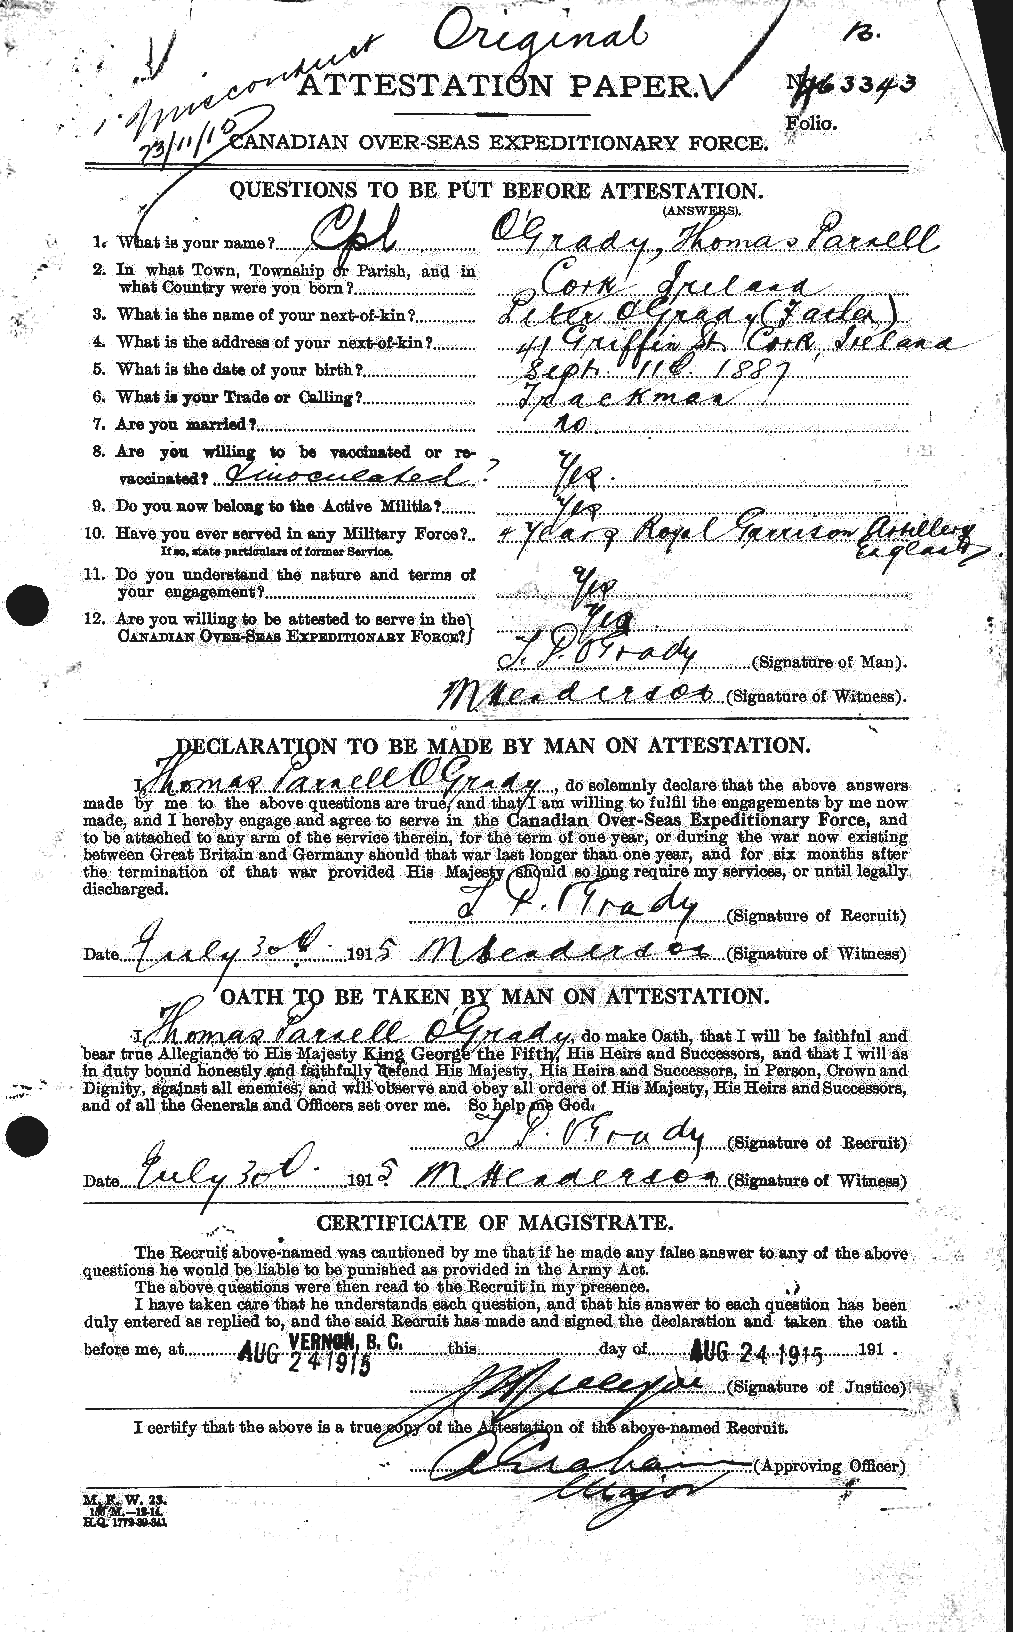 Personnel Records of the First World War - CEF 551386a